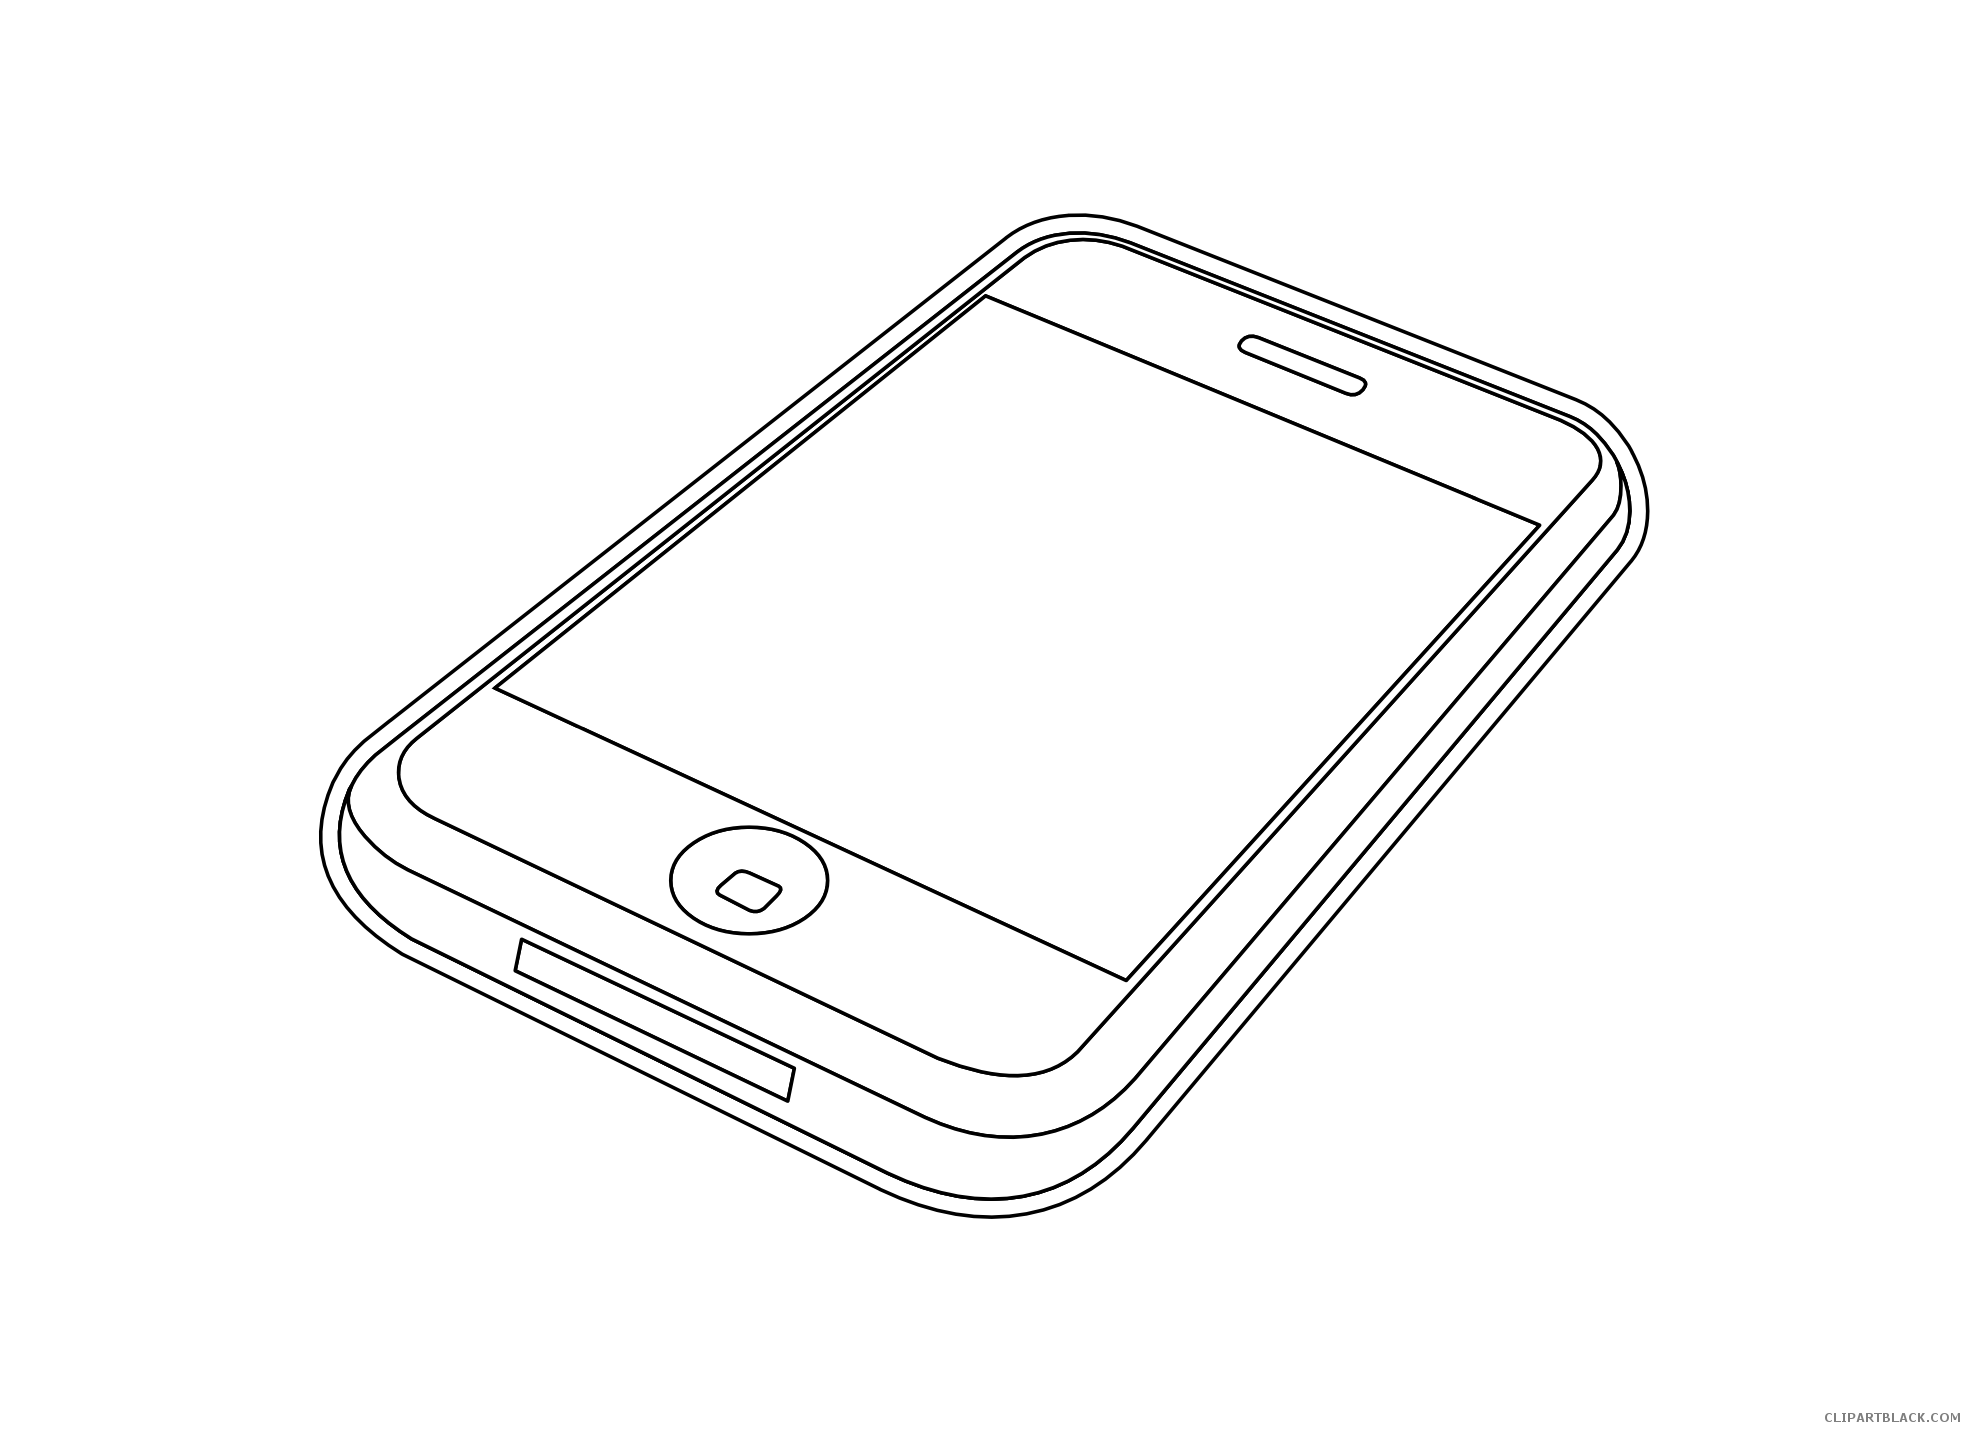 iphone clipart iphone outline